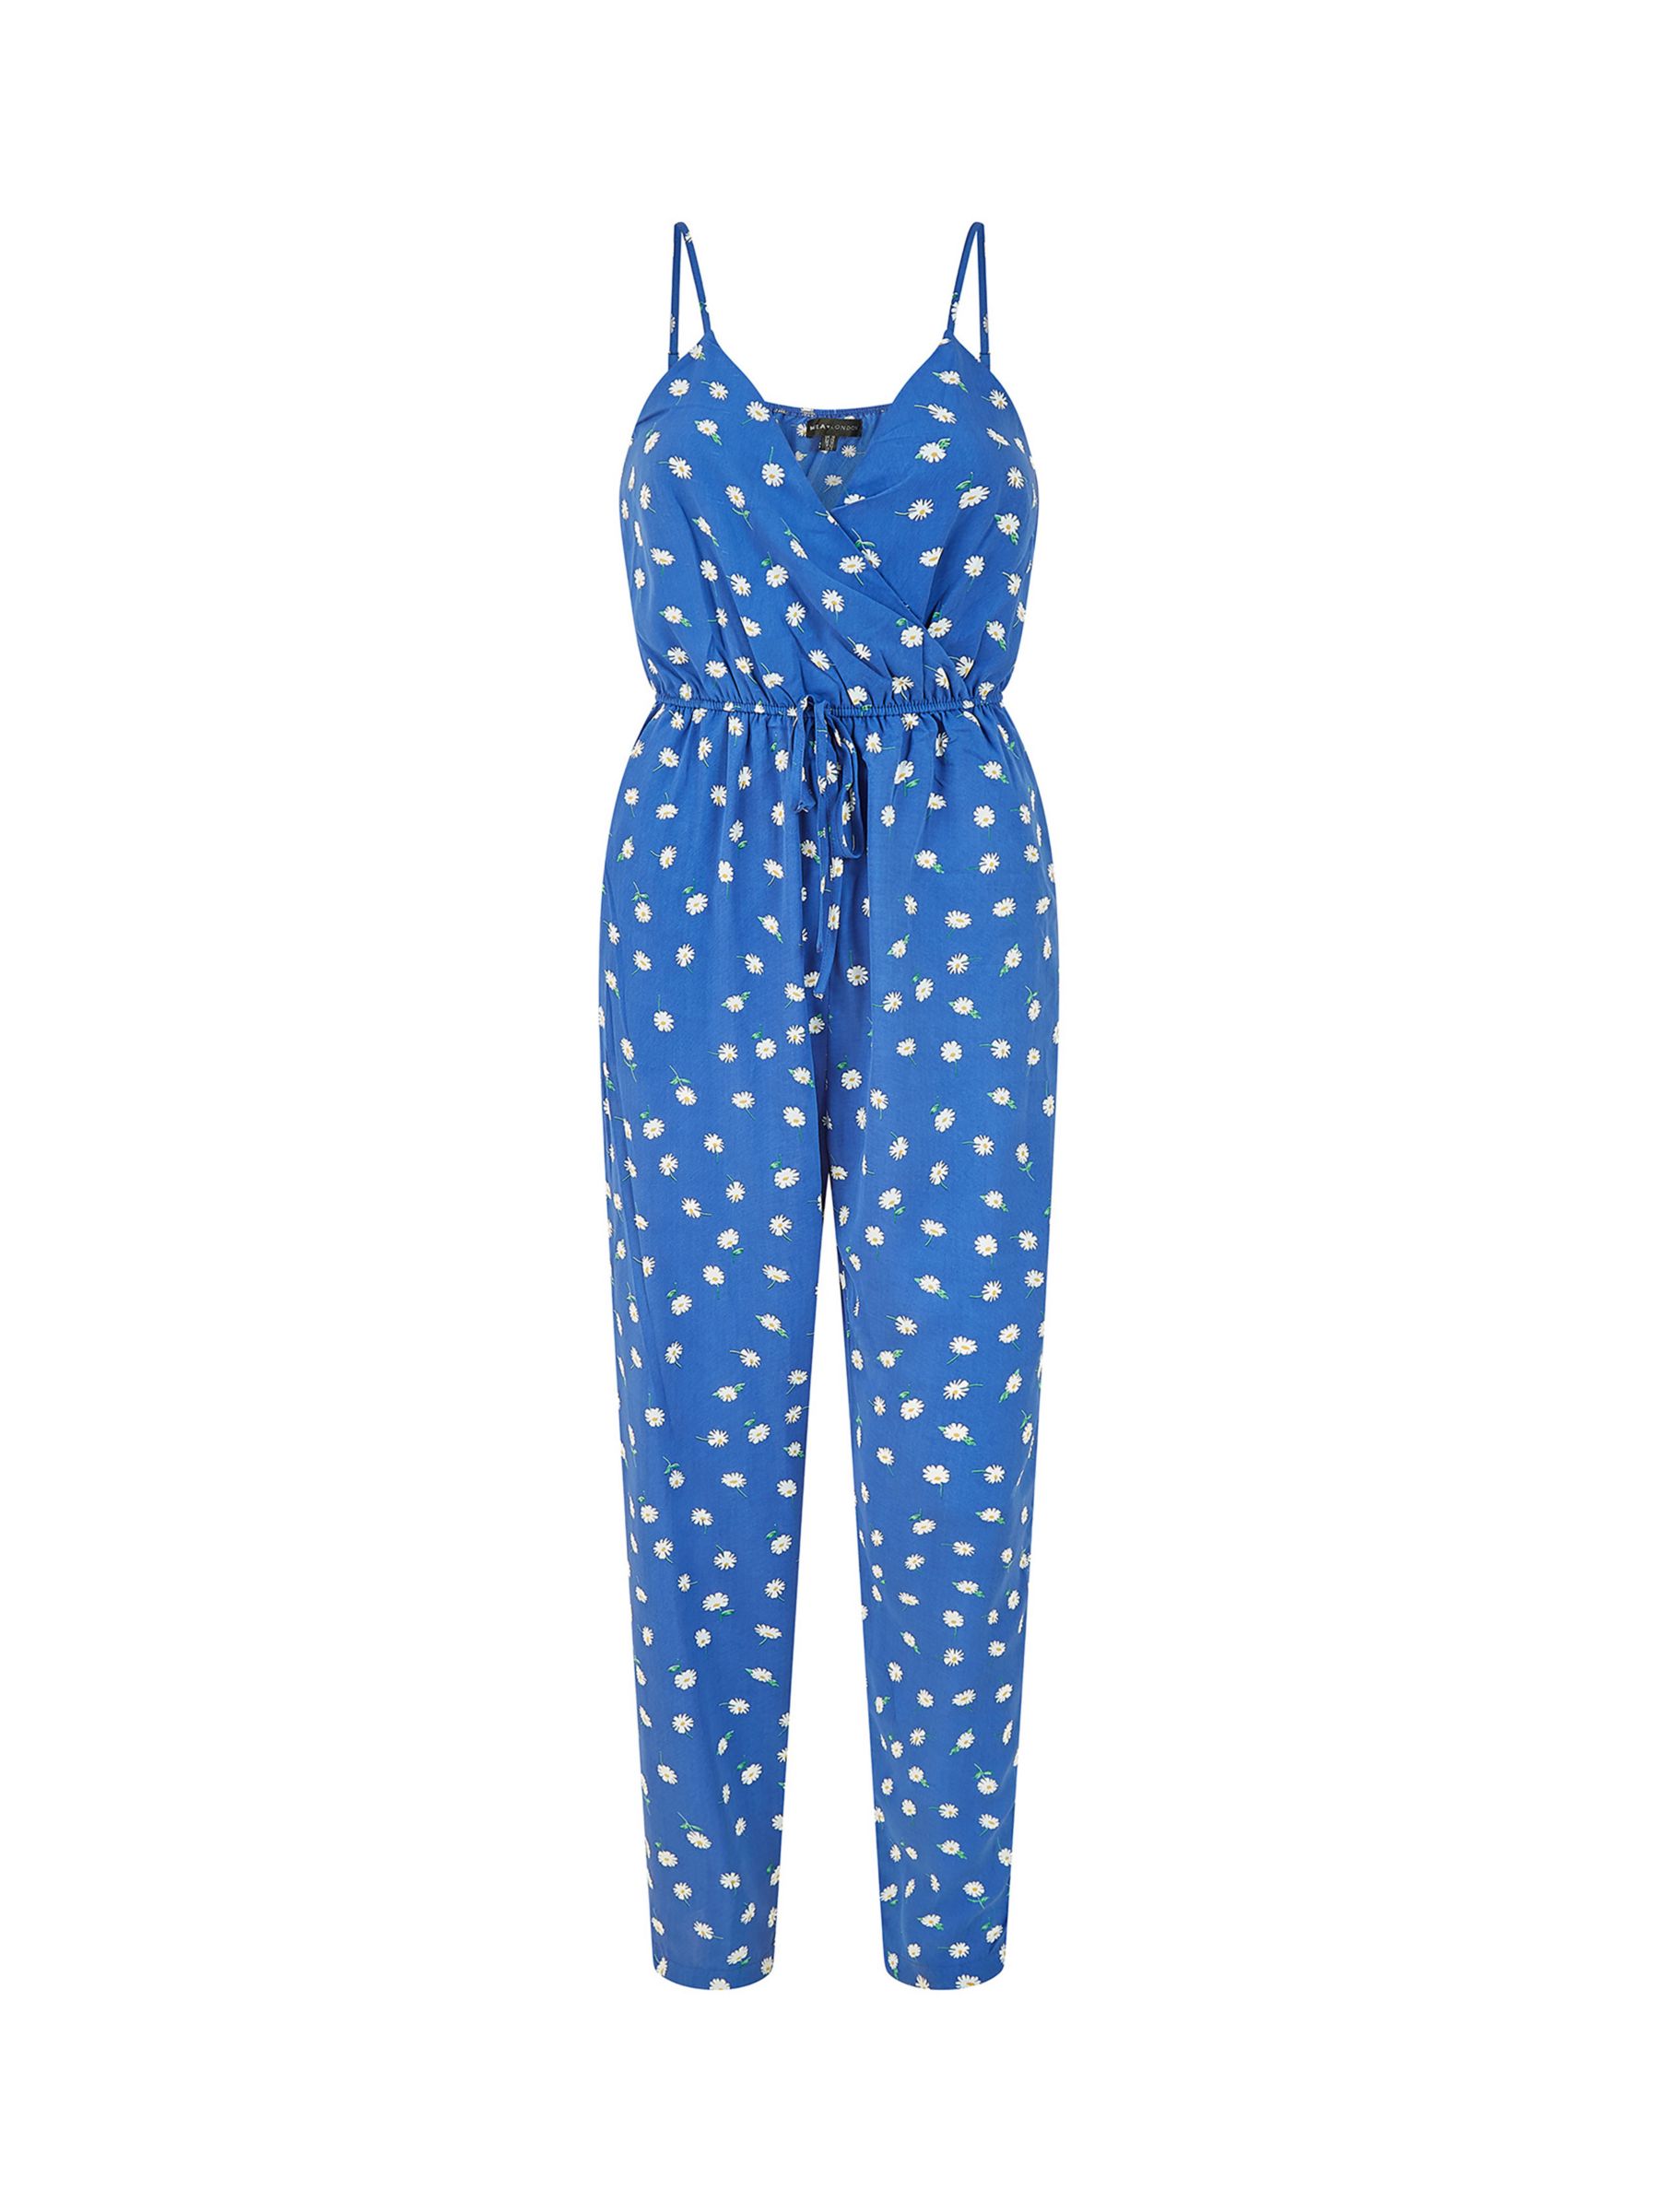 Buy Yumi Daisy Print Strappy Jumpsuit, Blue Online at johnlewis.com